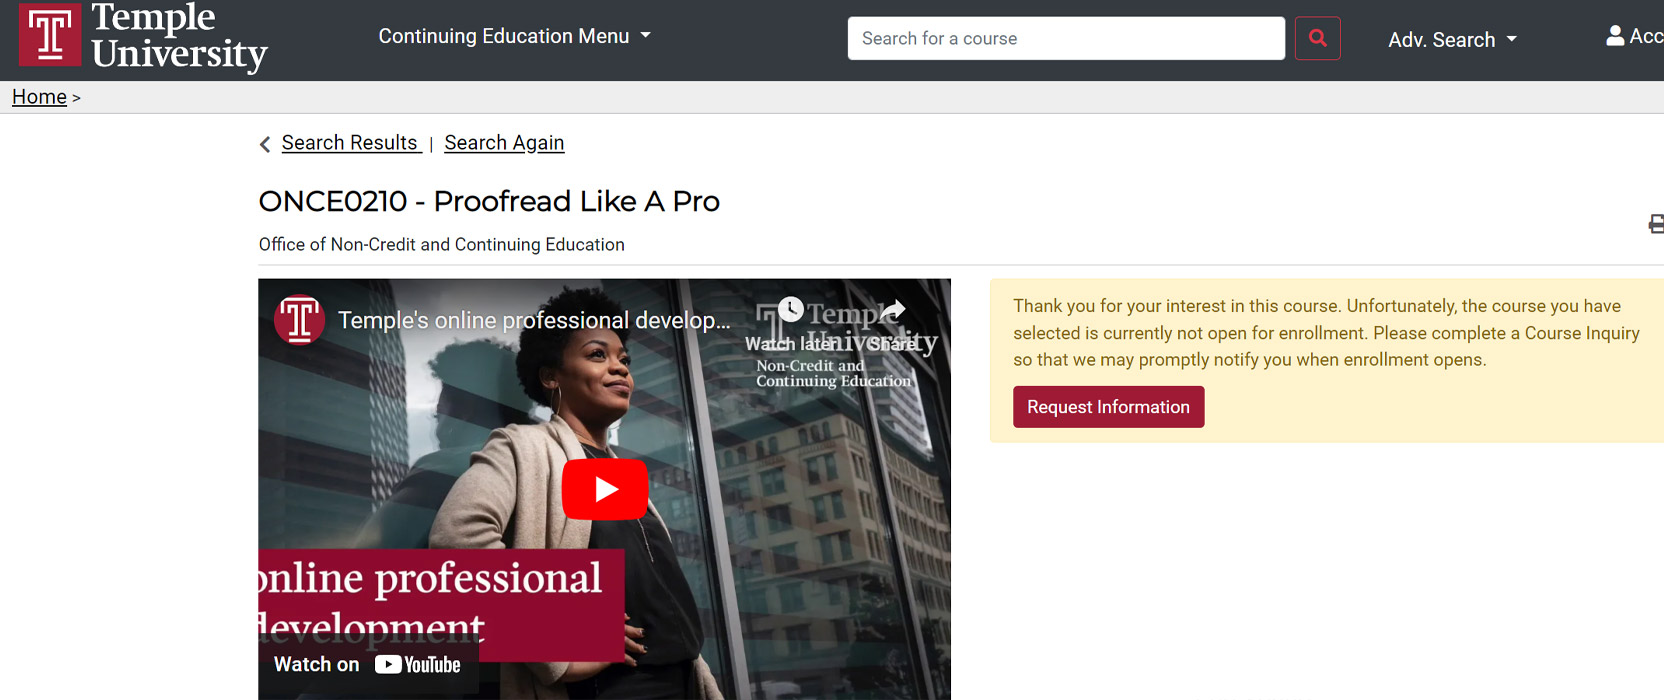 Screenshot of the Temple University proofreading course page